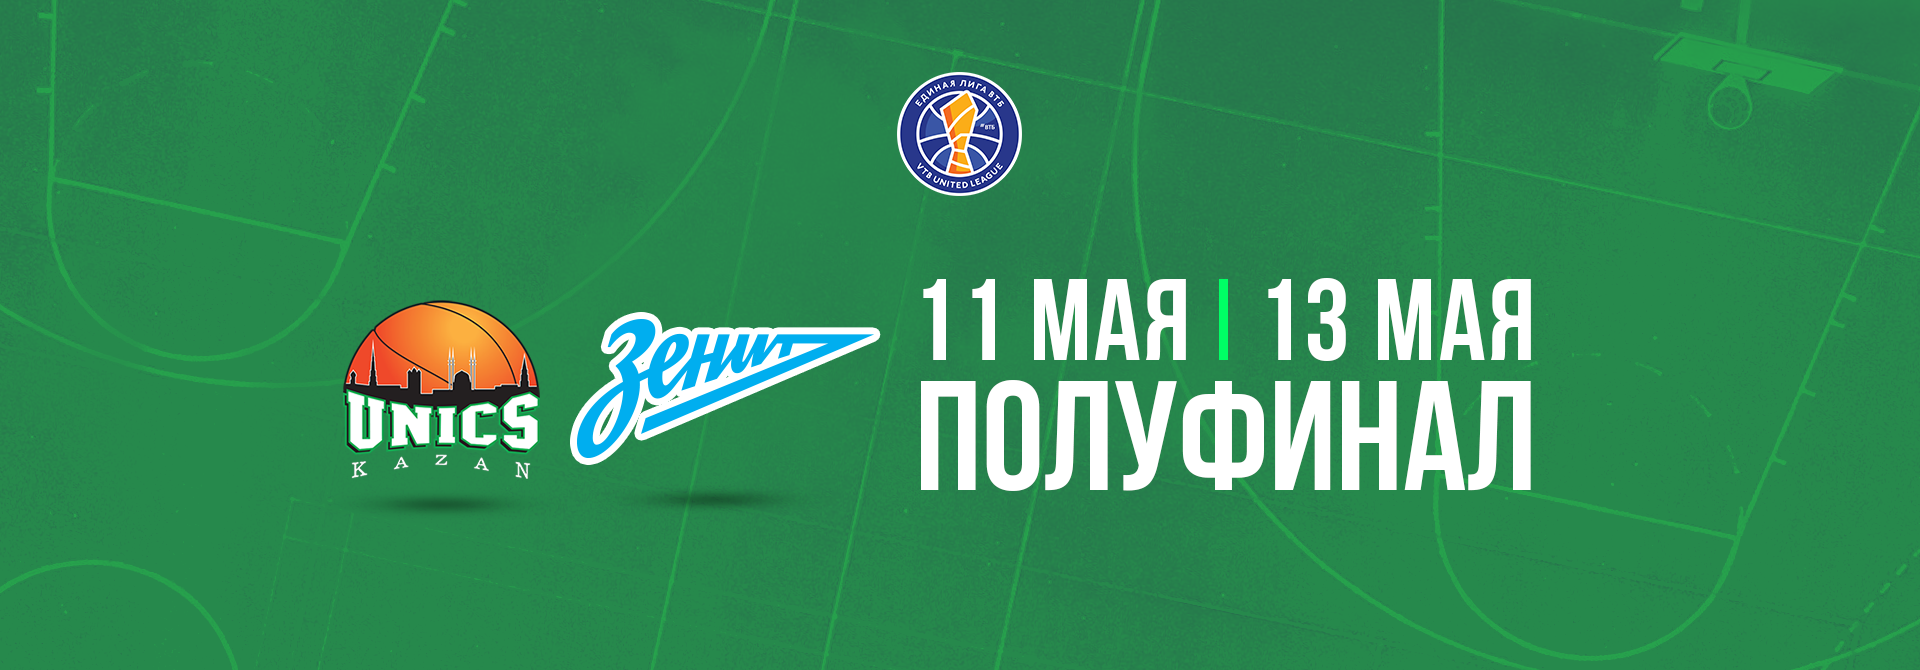 We will play with Zenit in the semifinal